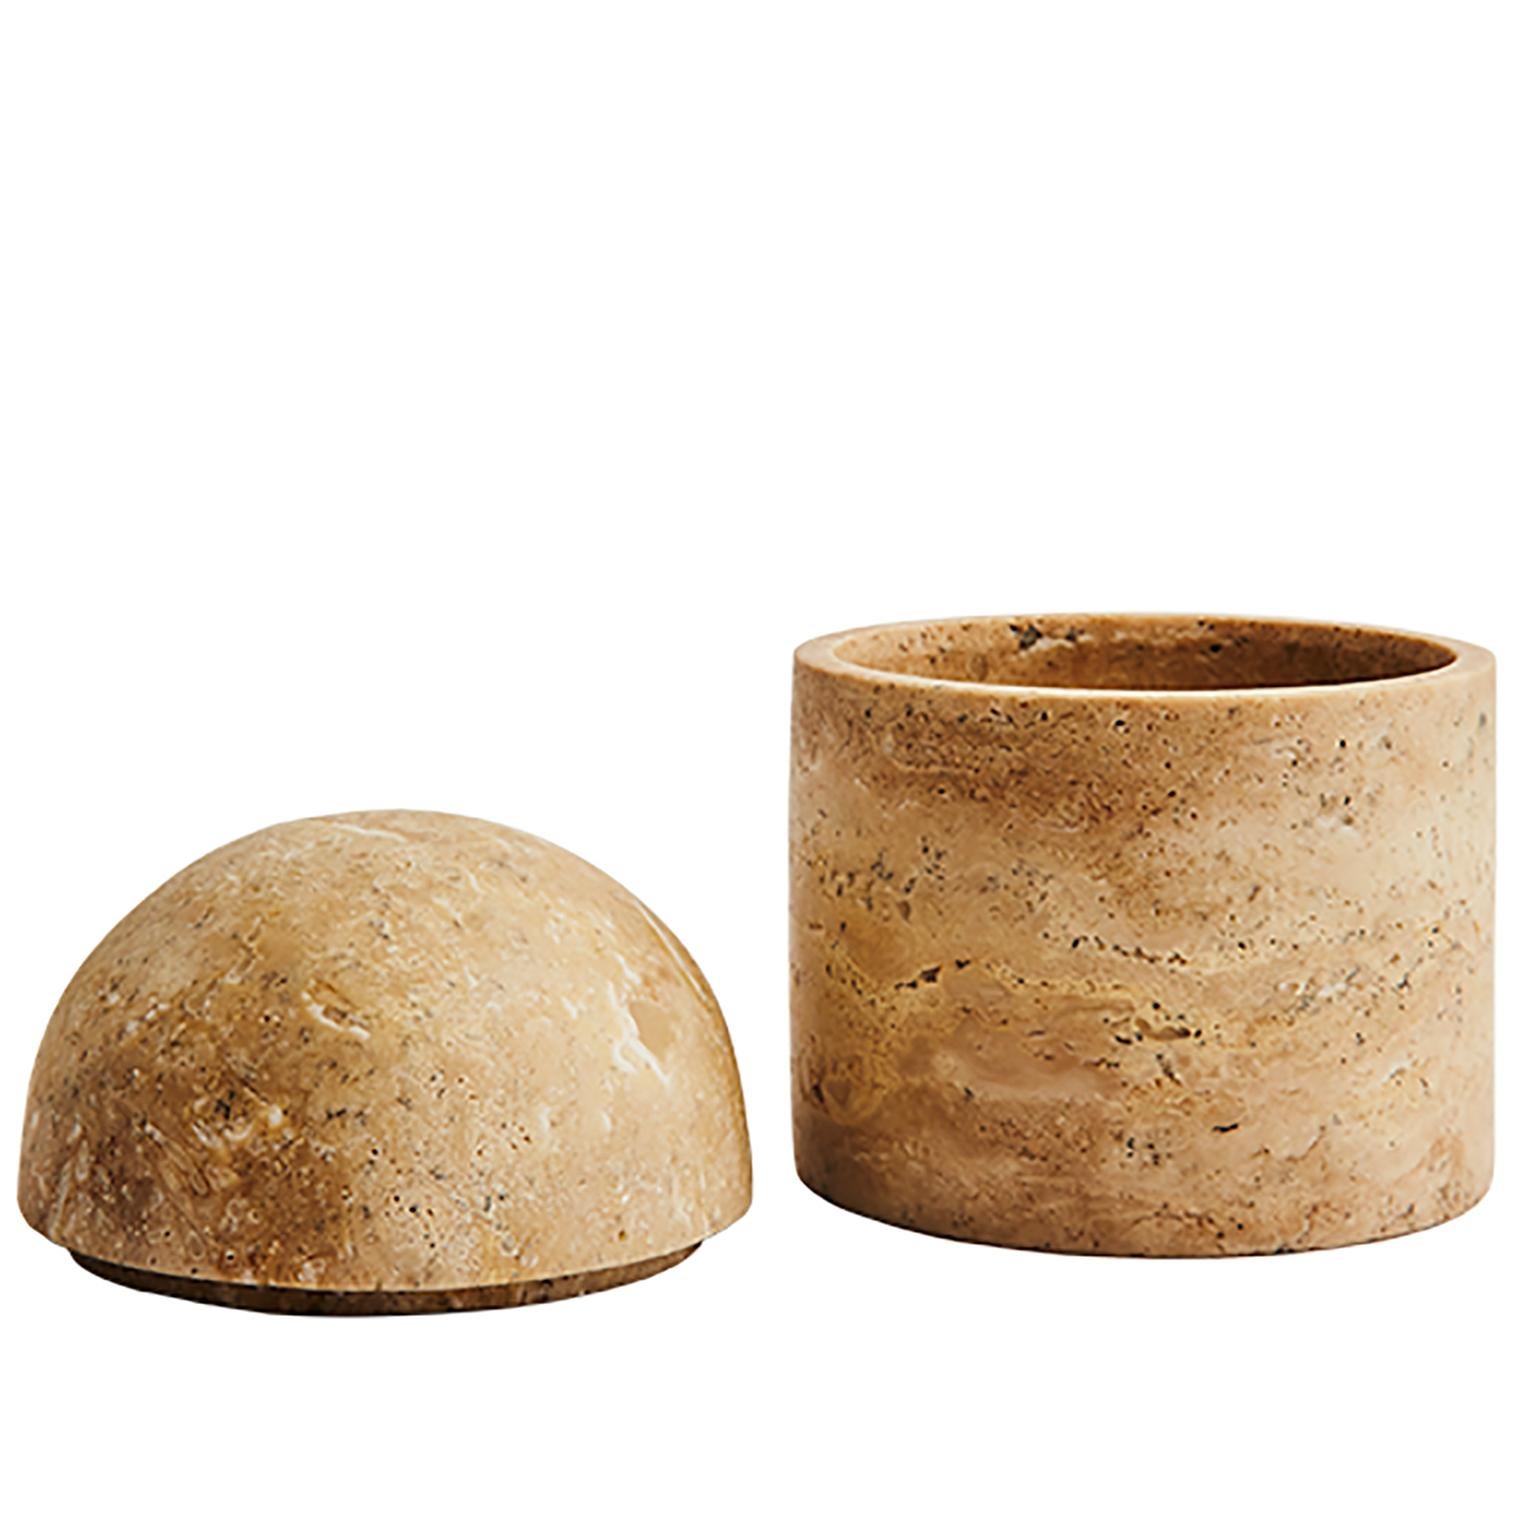 These playful beehive-inspired domes are beautiful decorative pieces that also conceal your most prized possessions. This family of vessels are hand carved and offered in two sizes. The texture and warmth of the travertine stone plays well with the